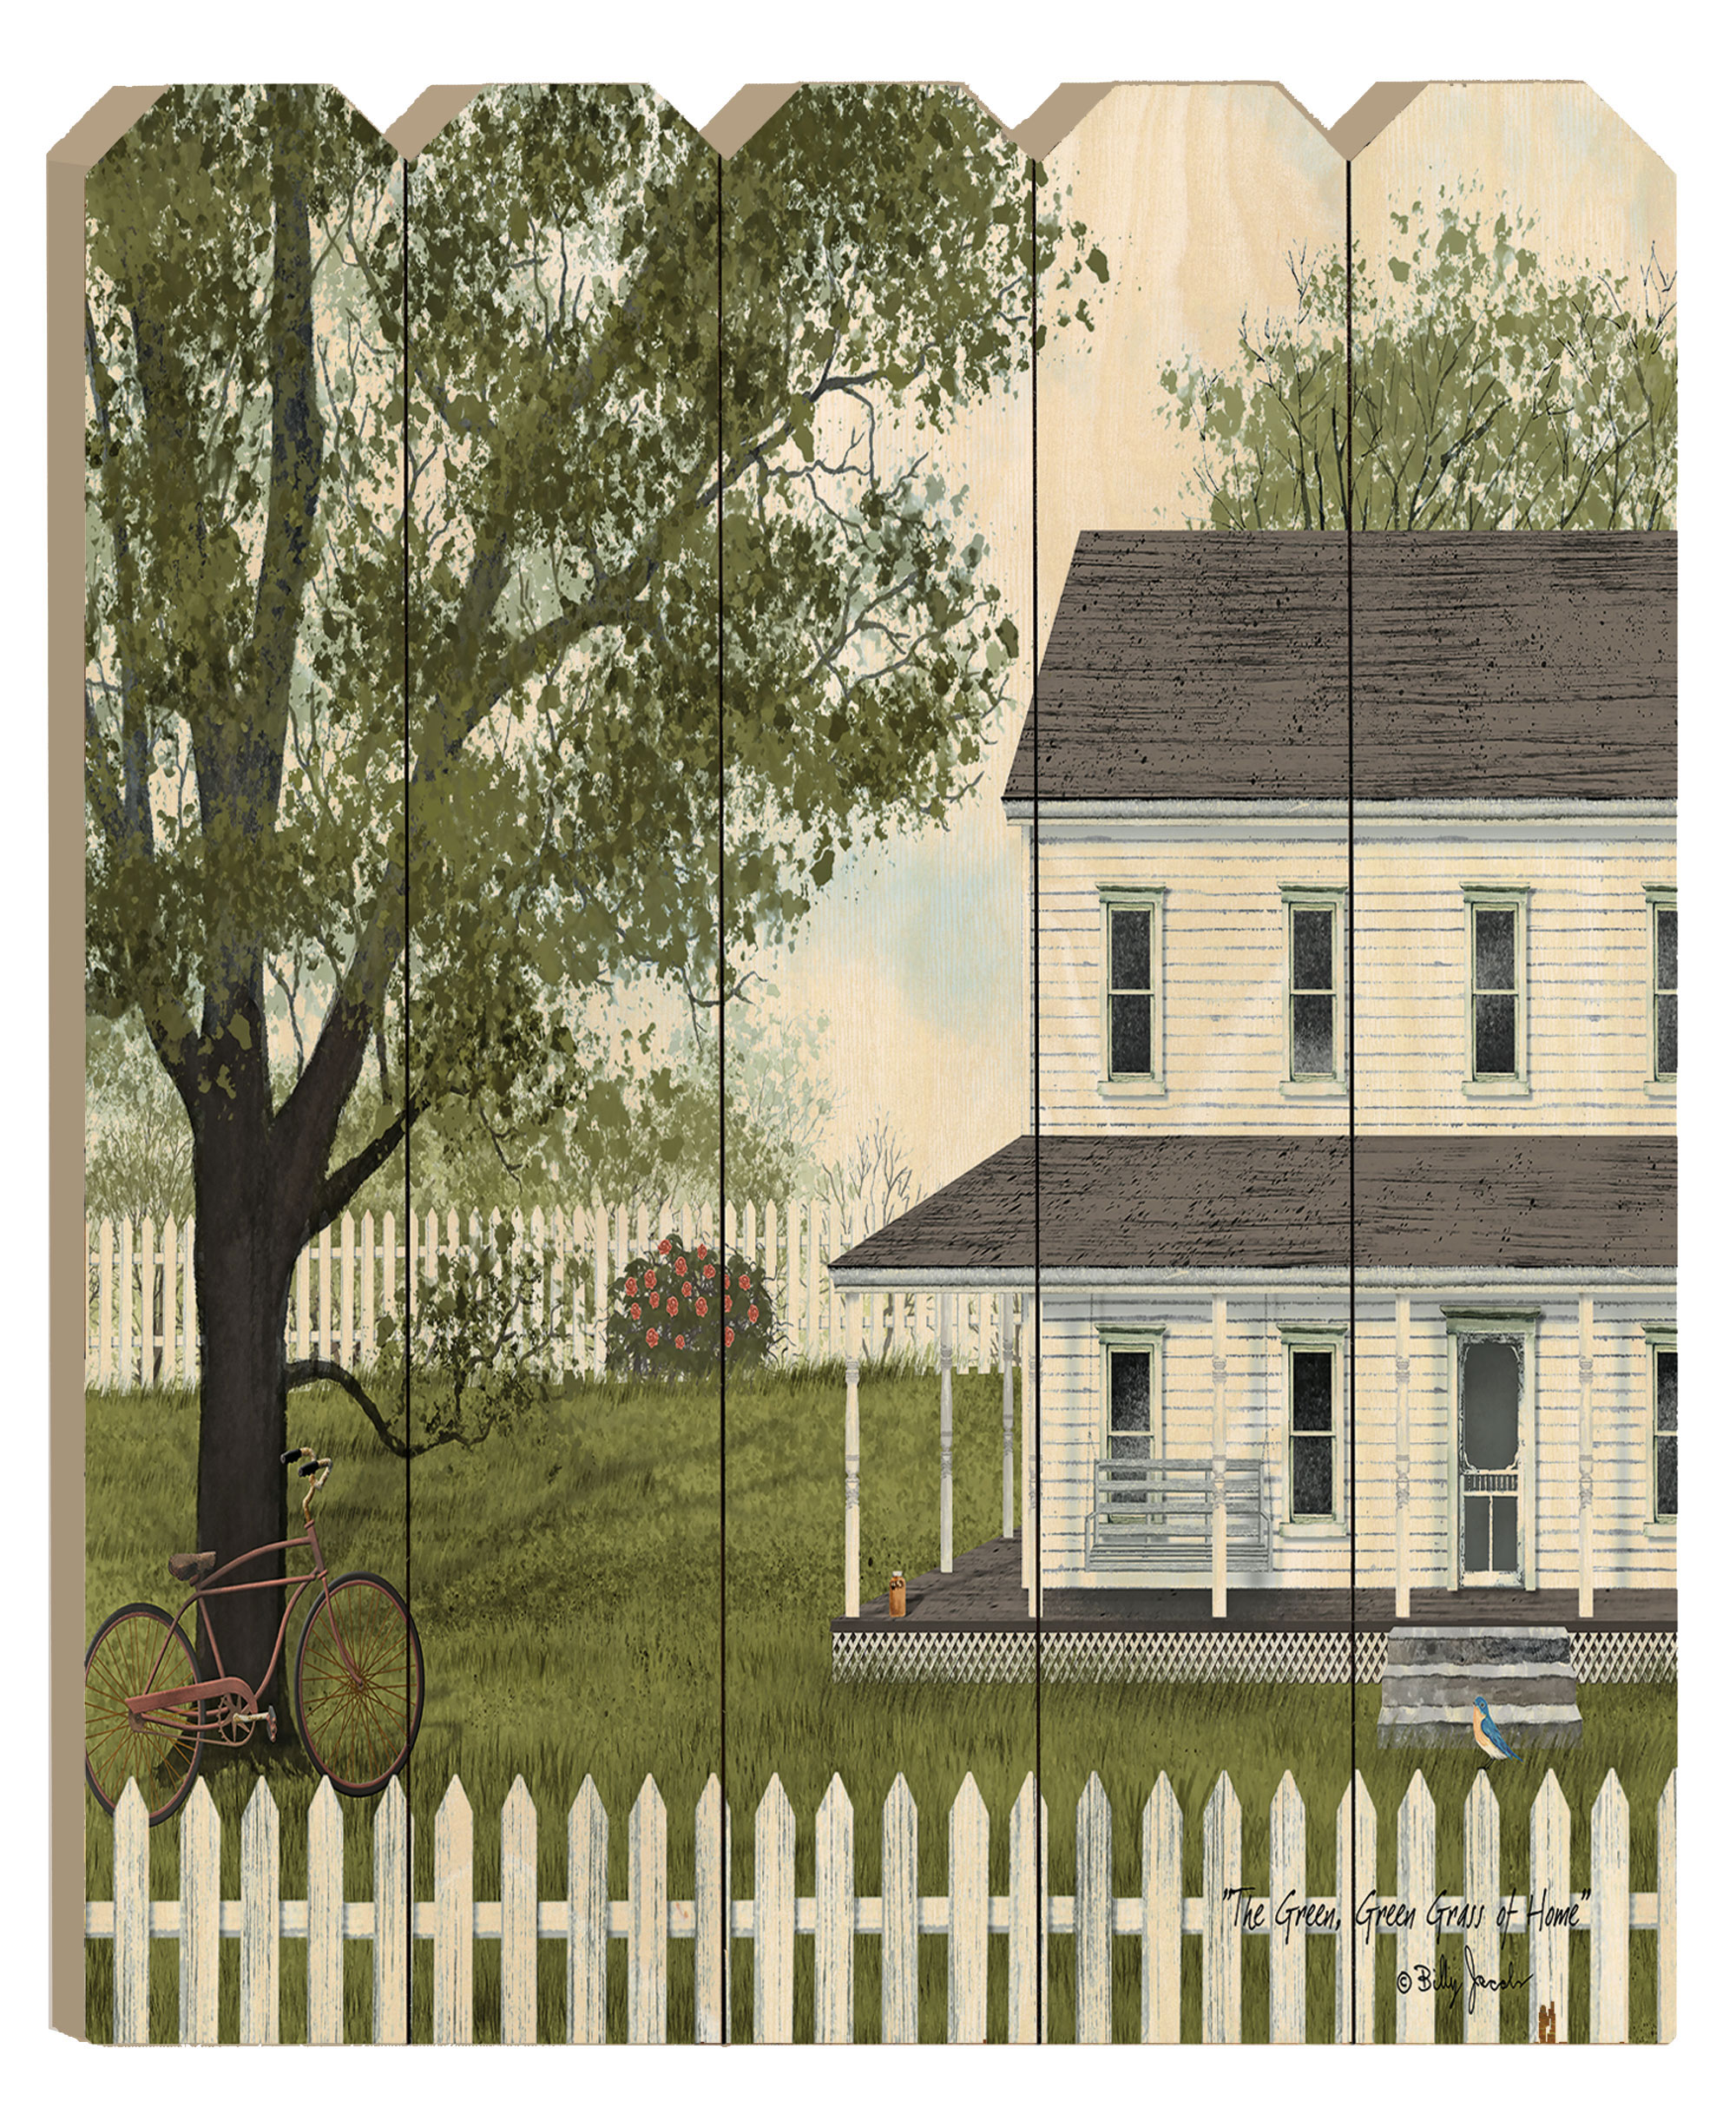 "Green Green Grass of Home" By Artisan Billy Jacobs, Printed on Wooden Picket Fence Wall Art